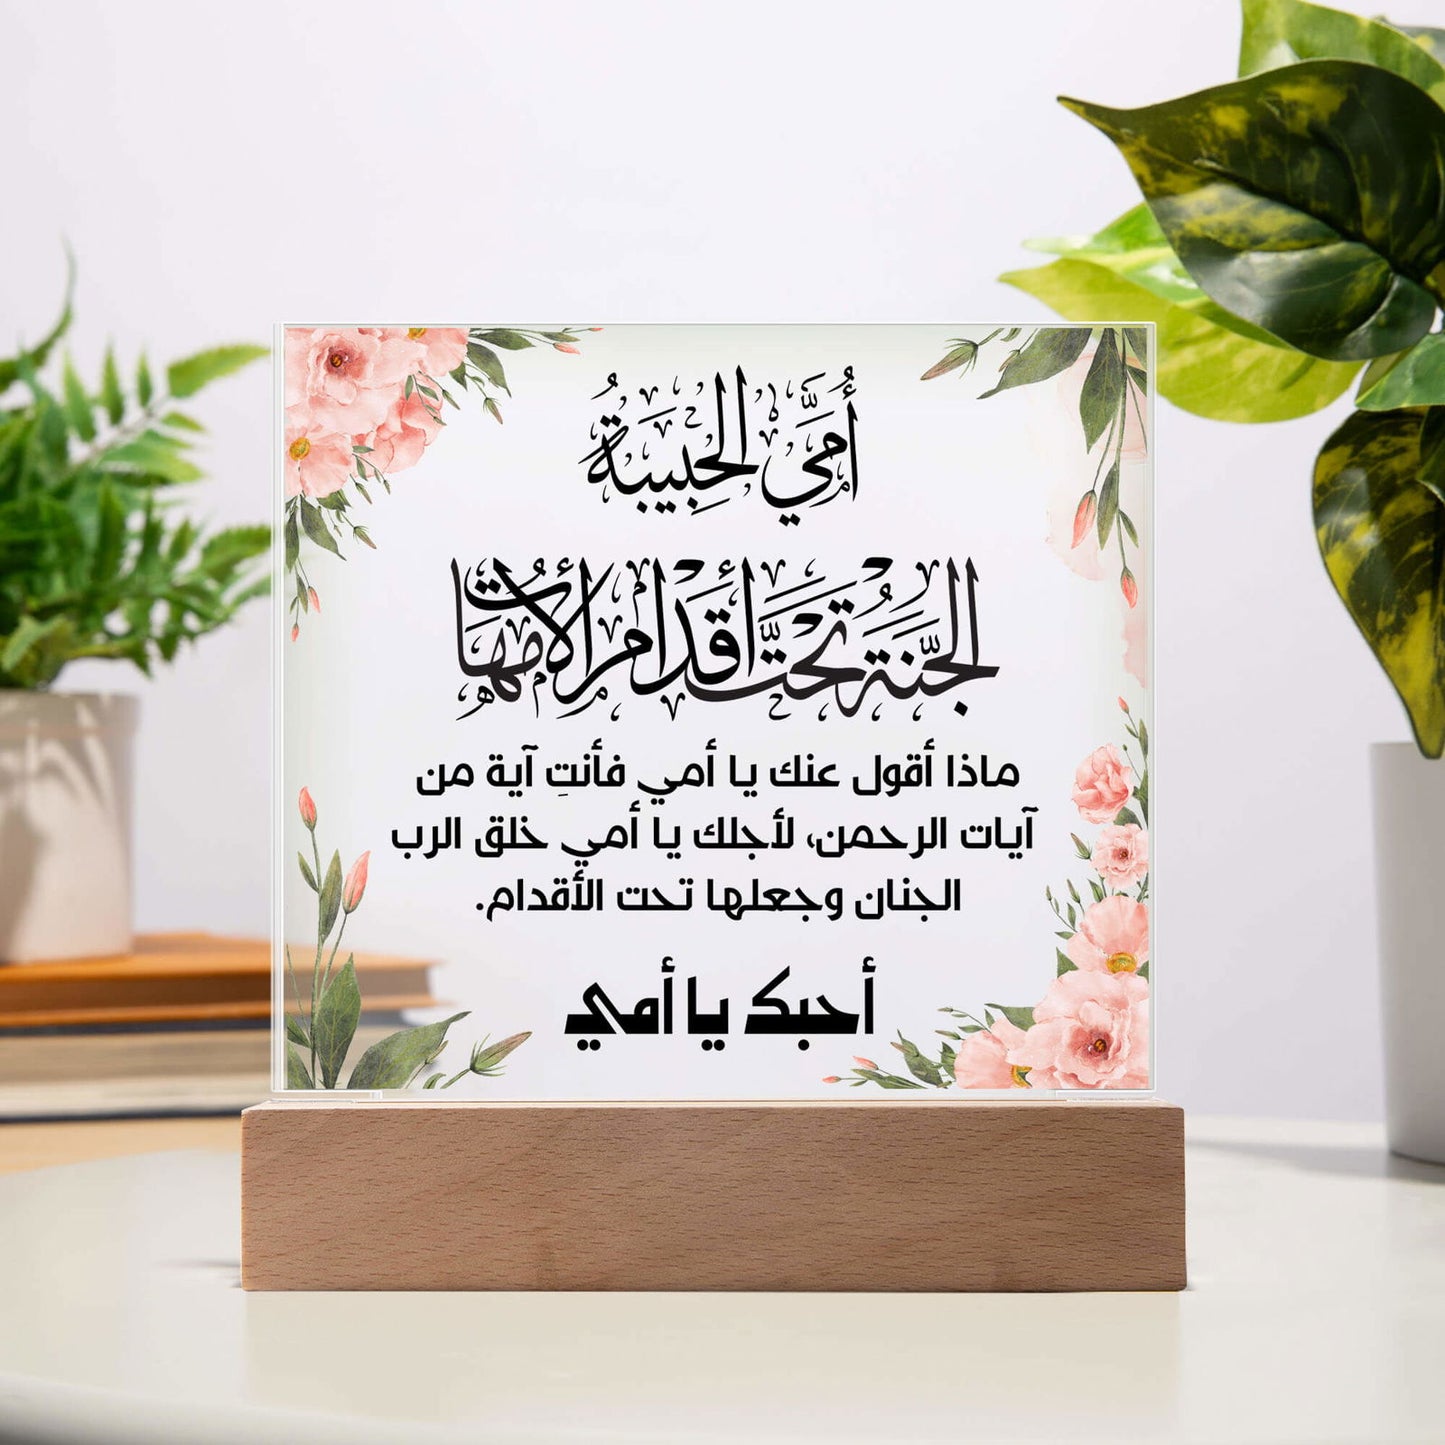 Mother's Day Gift - I Love You Mom - Islamic Gallery